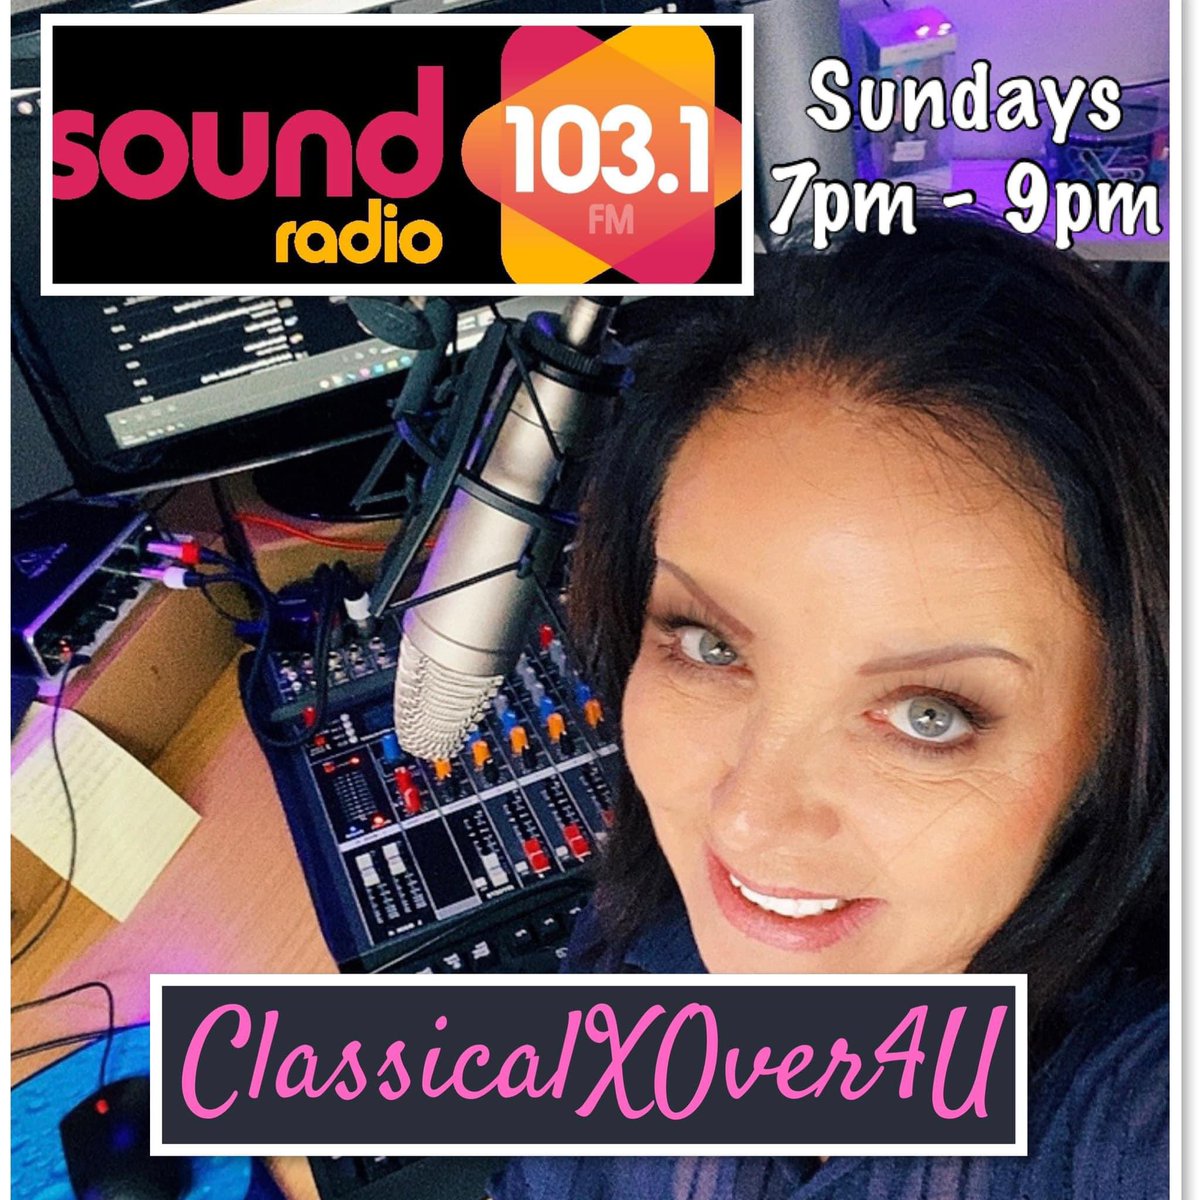 Some great new music on Sundays show @SoundRadio1031  hope you can join me from 7pm ‘Just ask Alexa to play Sound Radio Wales’  #nwaleshour